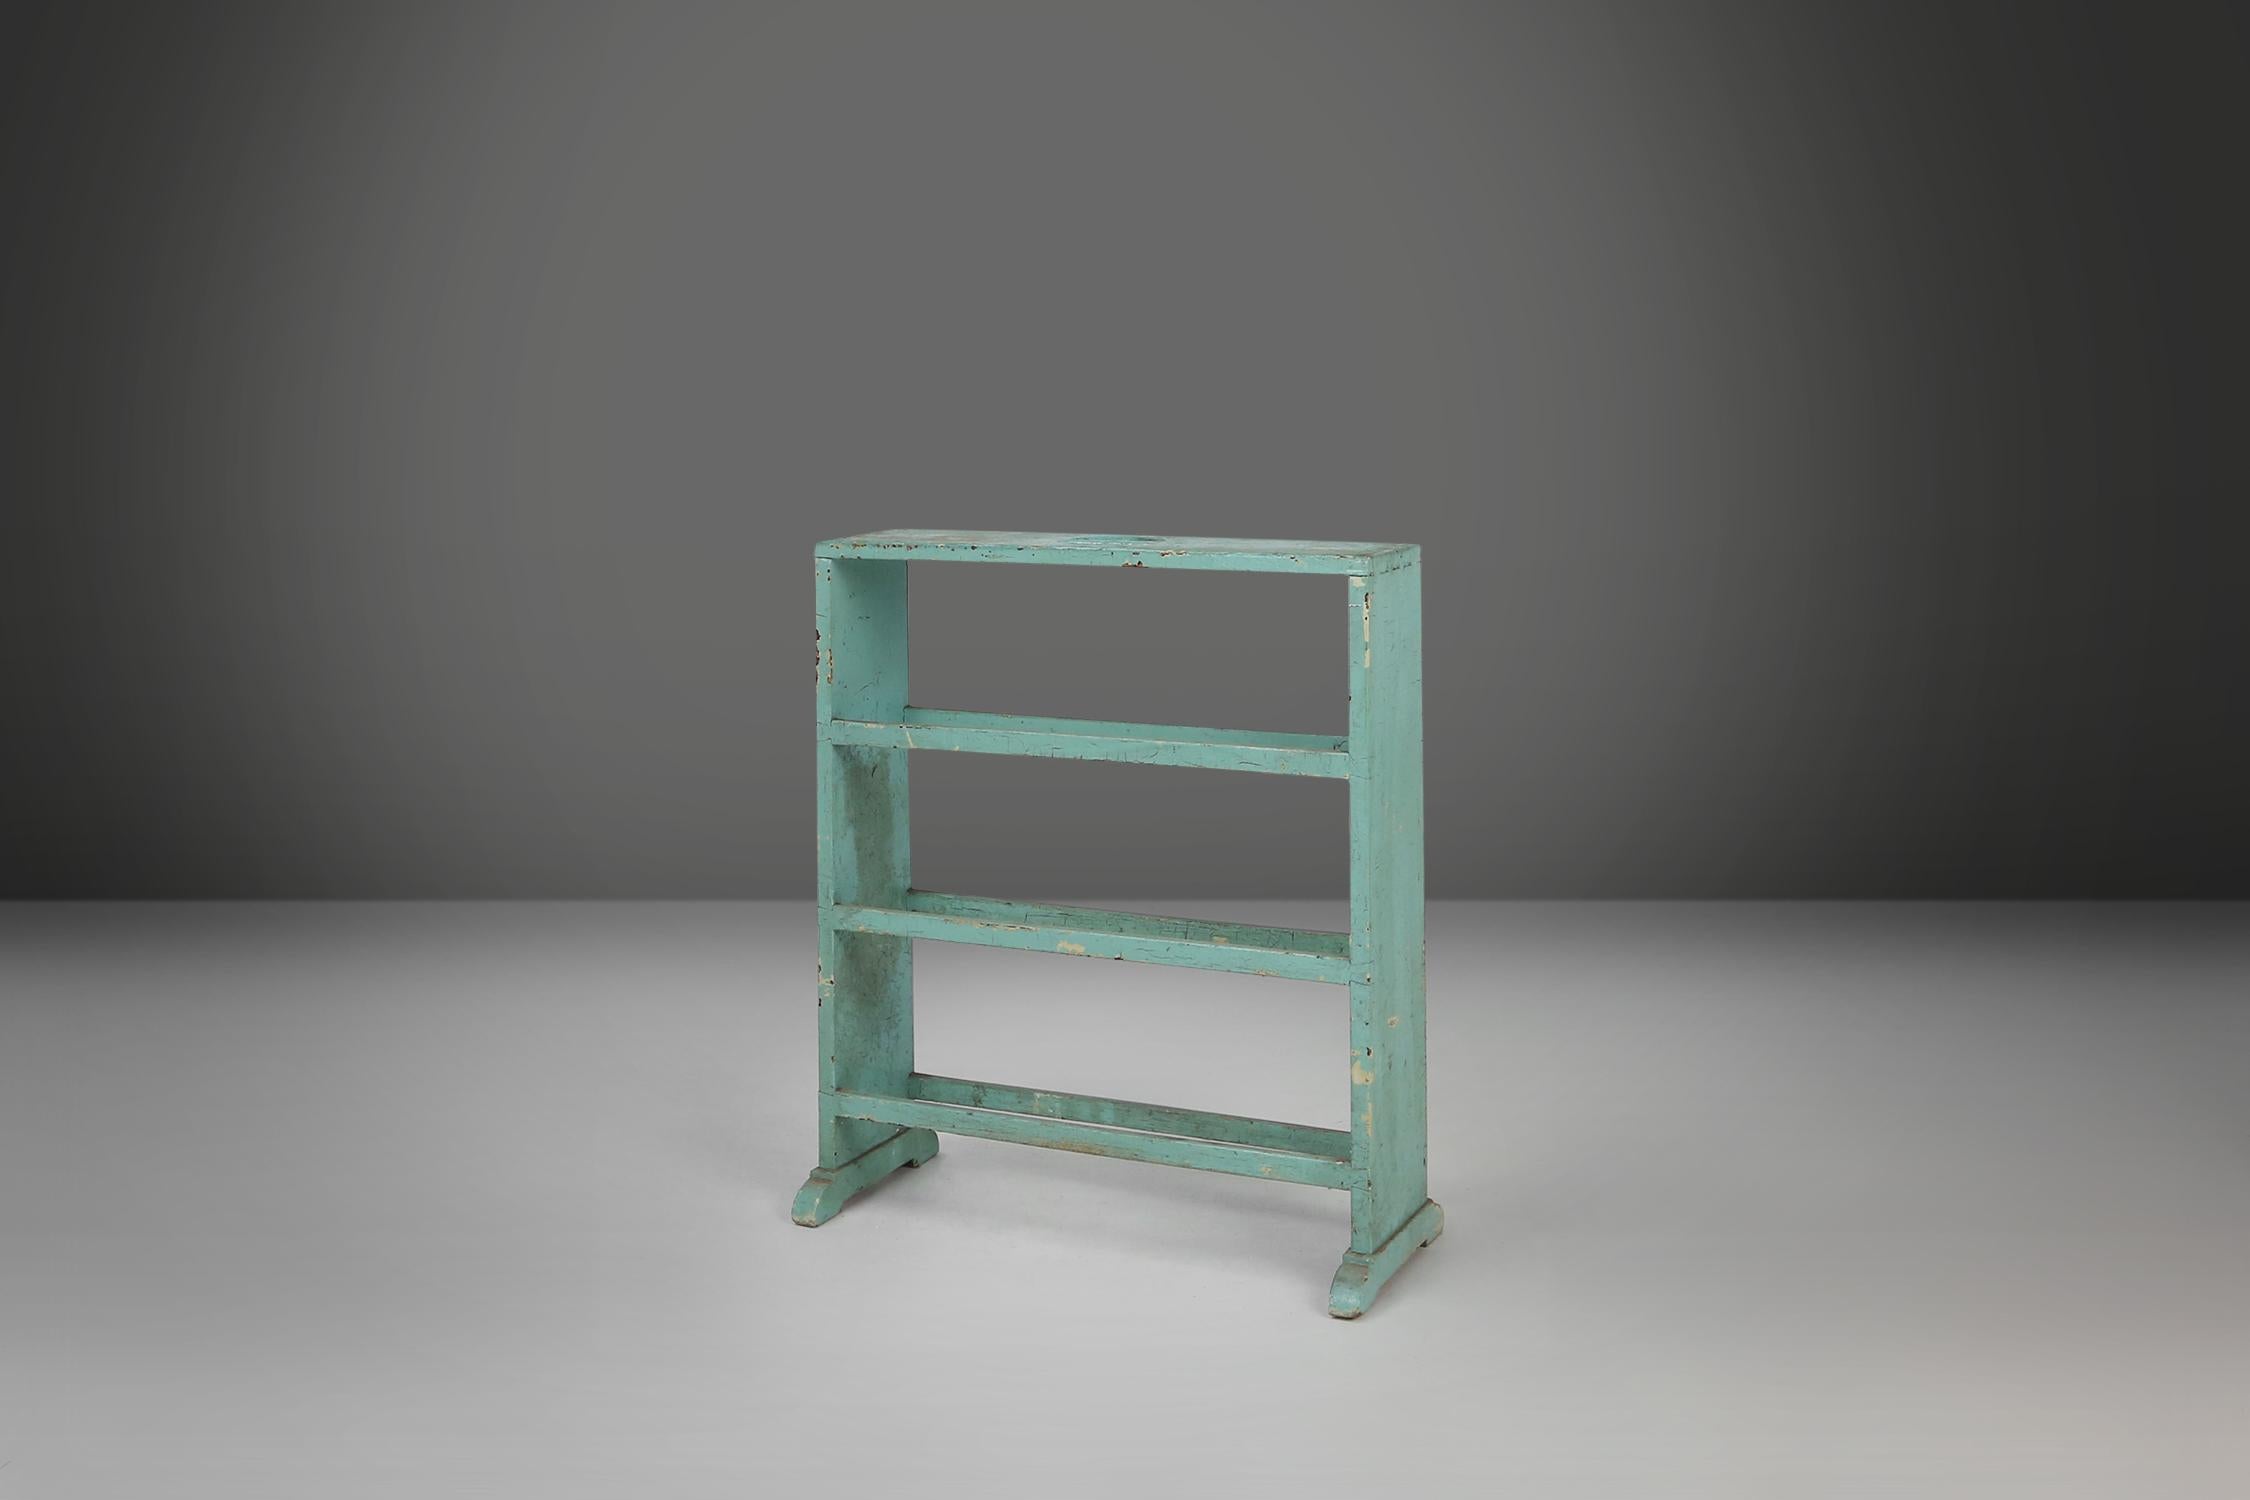 Belgium / 1920s / lacquered wood / mint /  mid-century / industrial / vintage / design

Industrial mint-colored rack or small bookcase with straight legs and nice sturdy feet and decorative handles on the top. The antique storage piece is made of